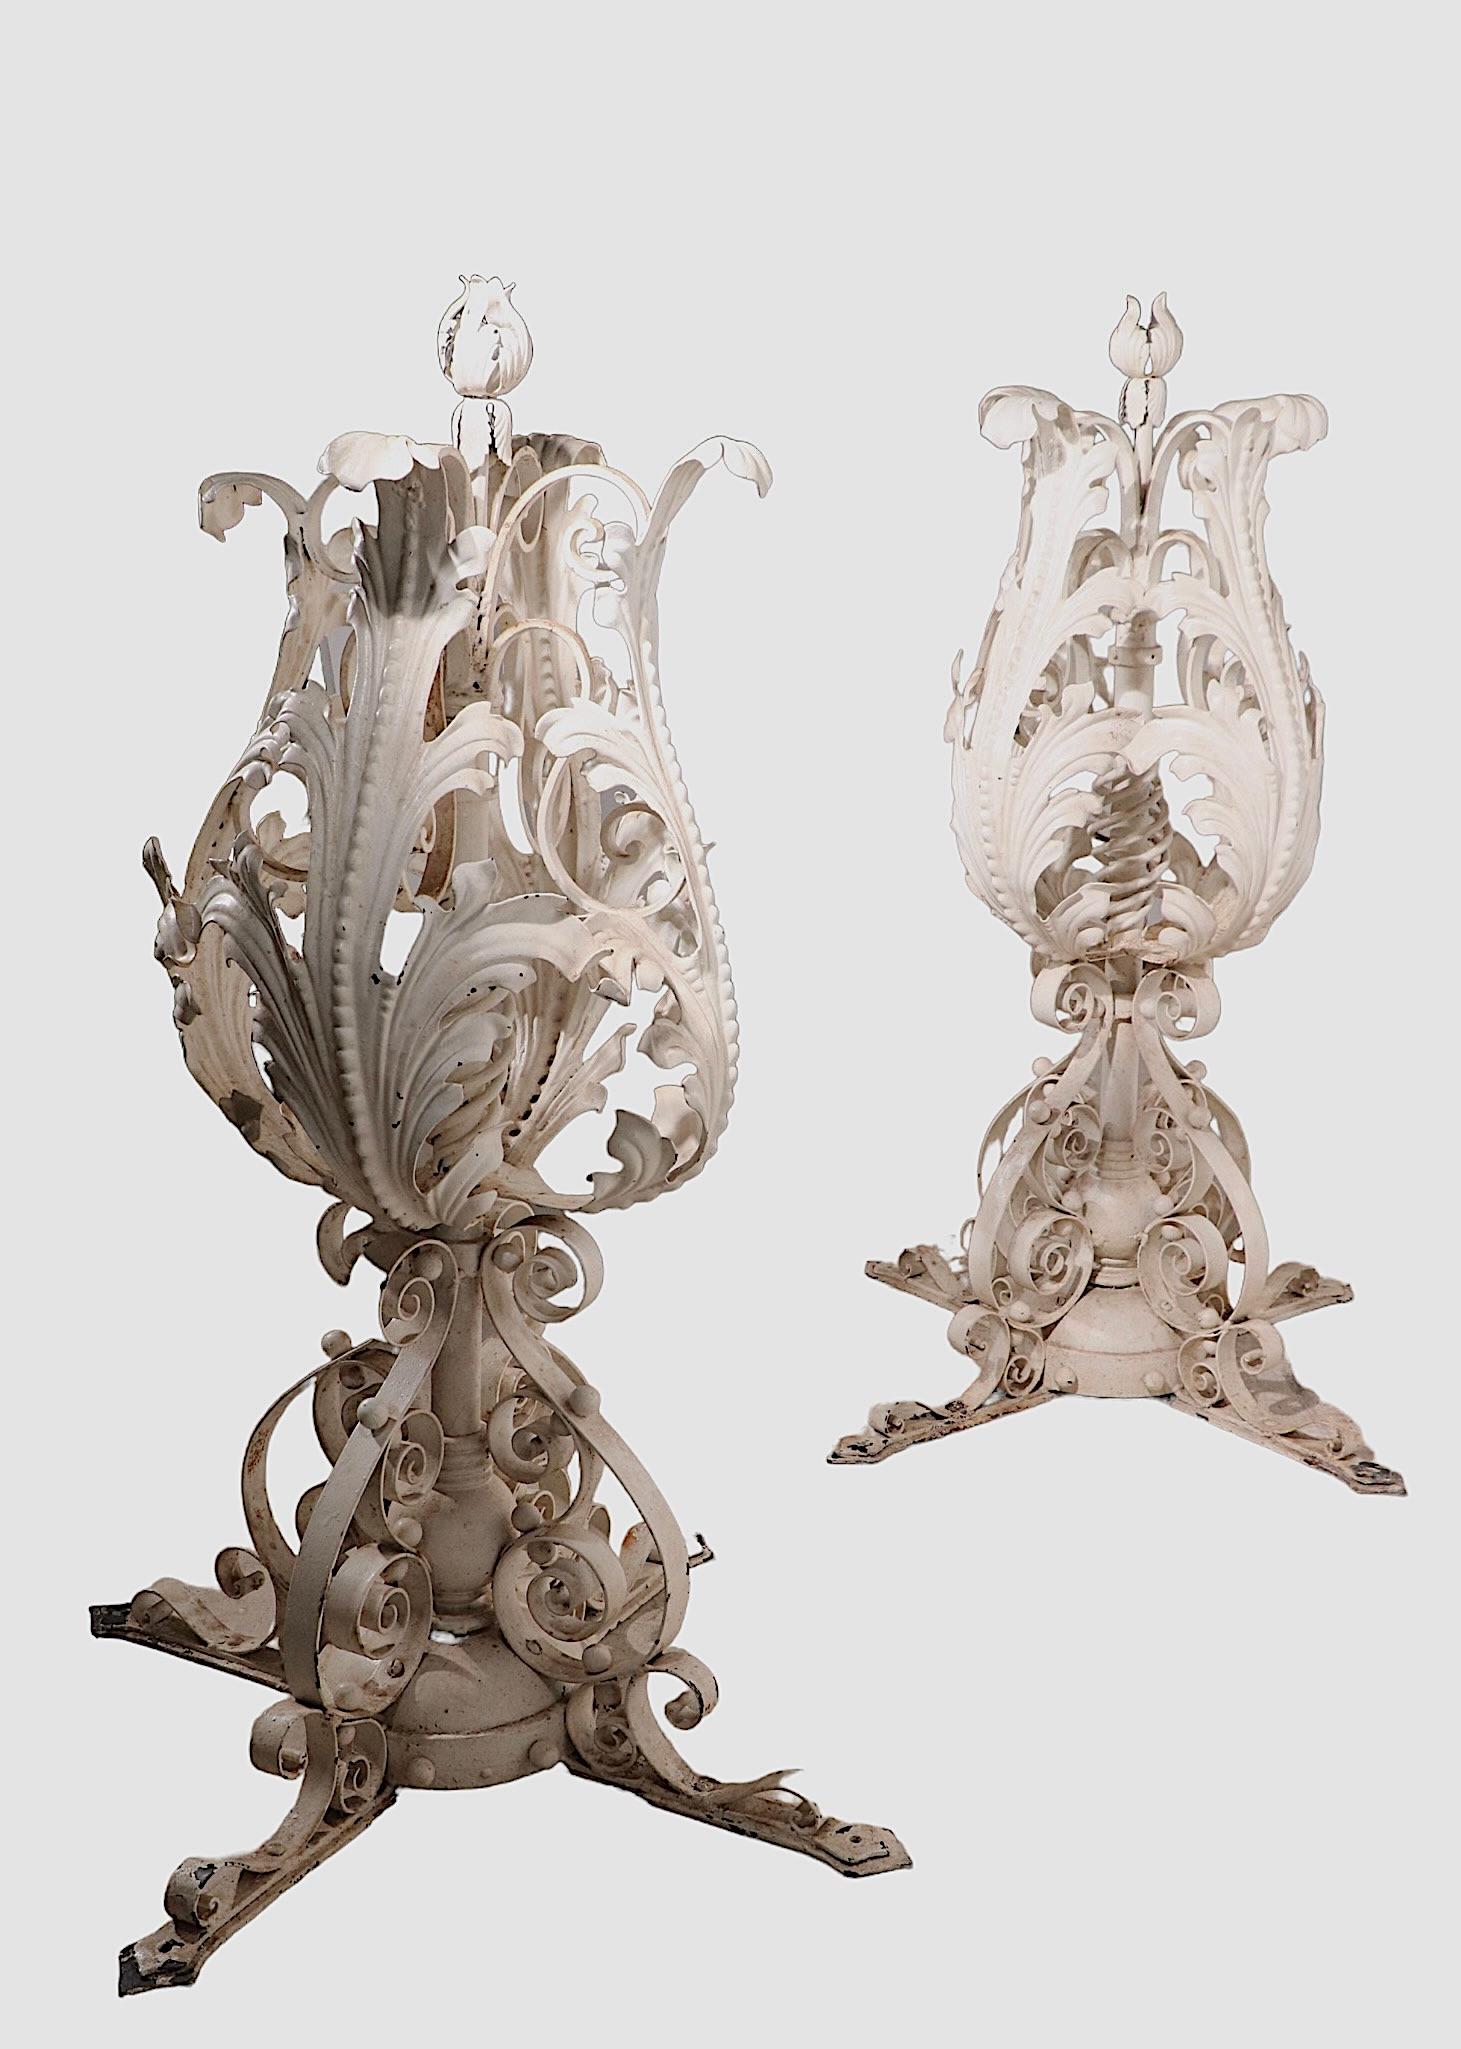  Large Pr. Wrought Iron Finials English  19th C. For Sale 9